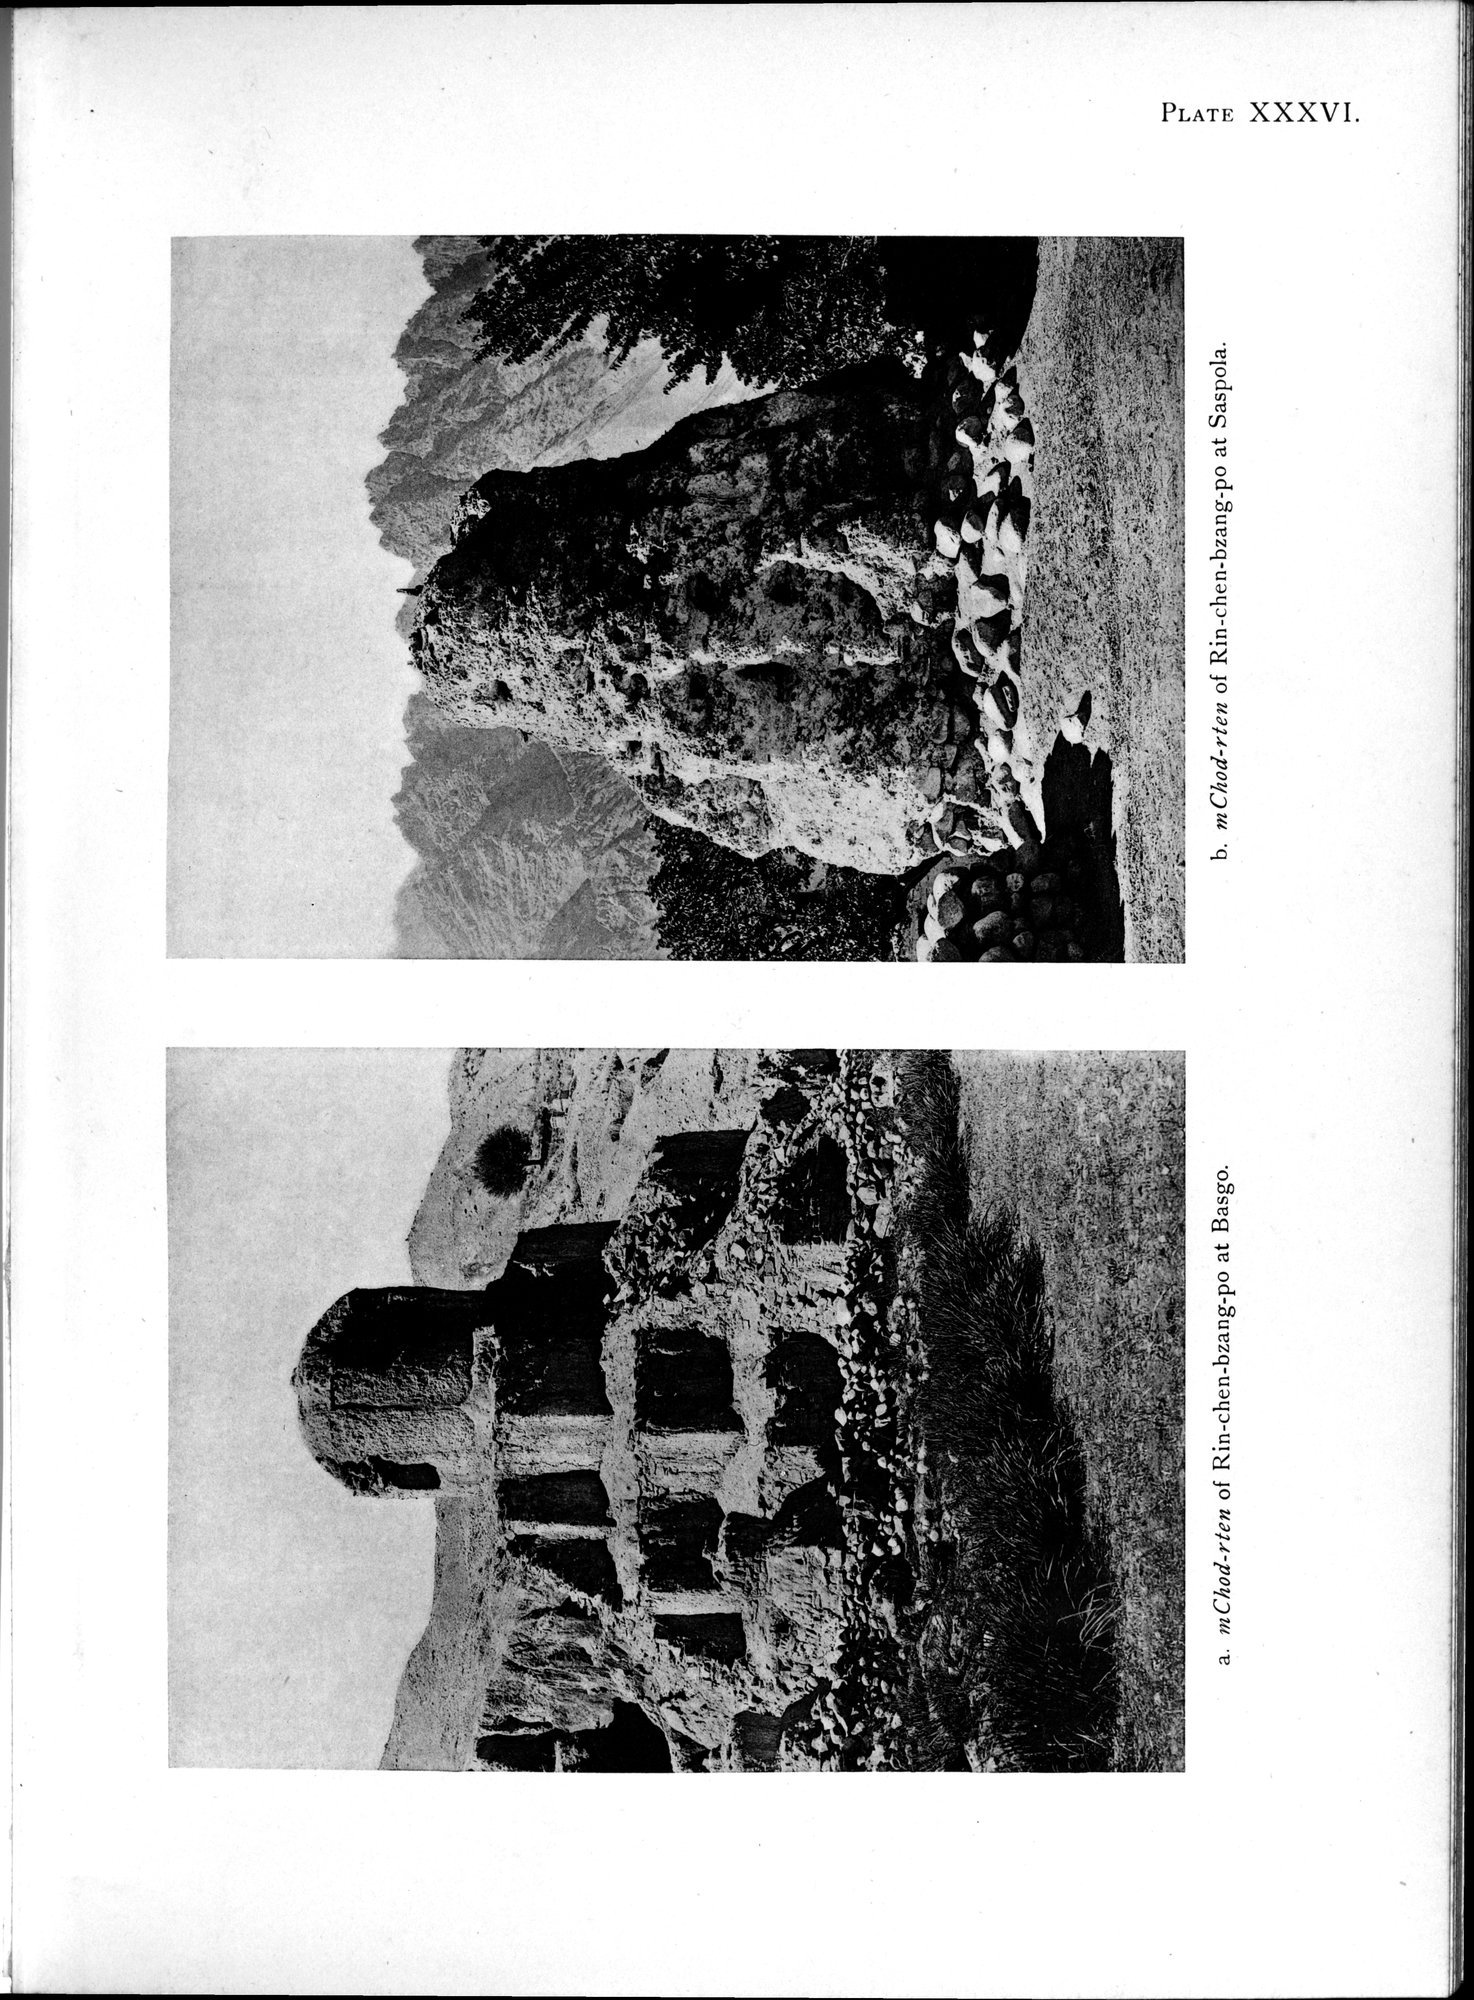 Antiquities of Indian Tibet : vol.1 / Page 181 (Grayscale High Resolution Image)